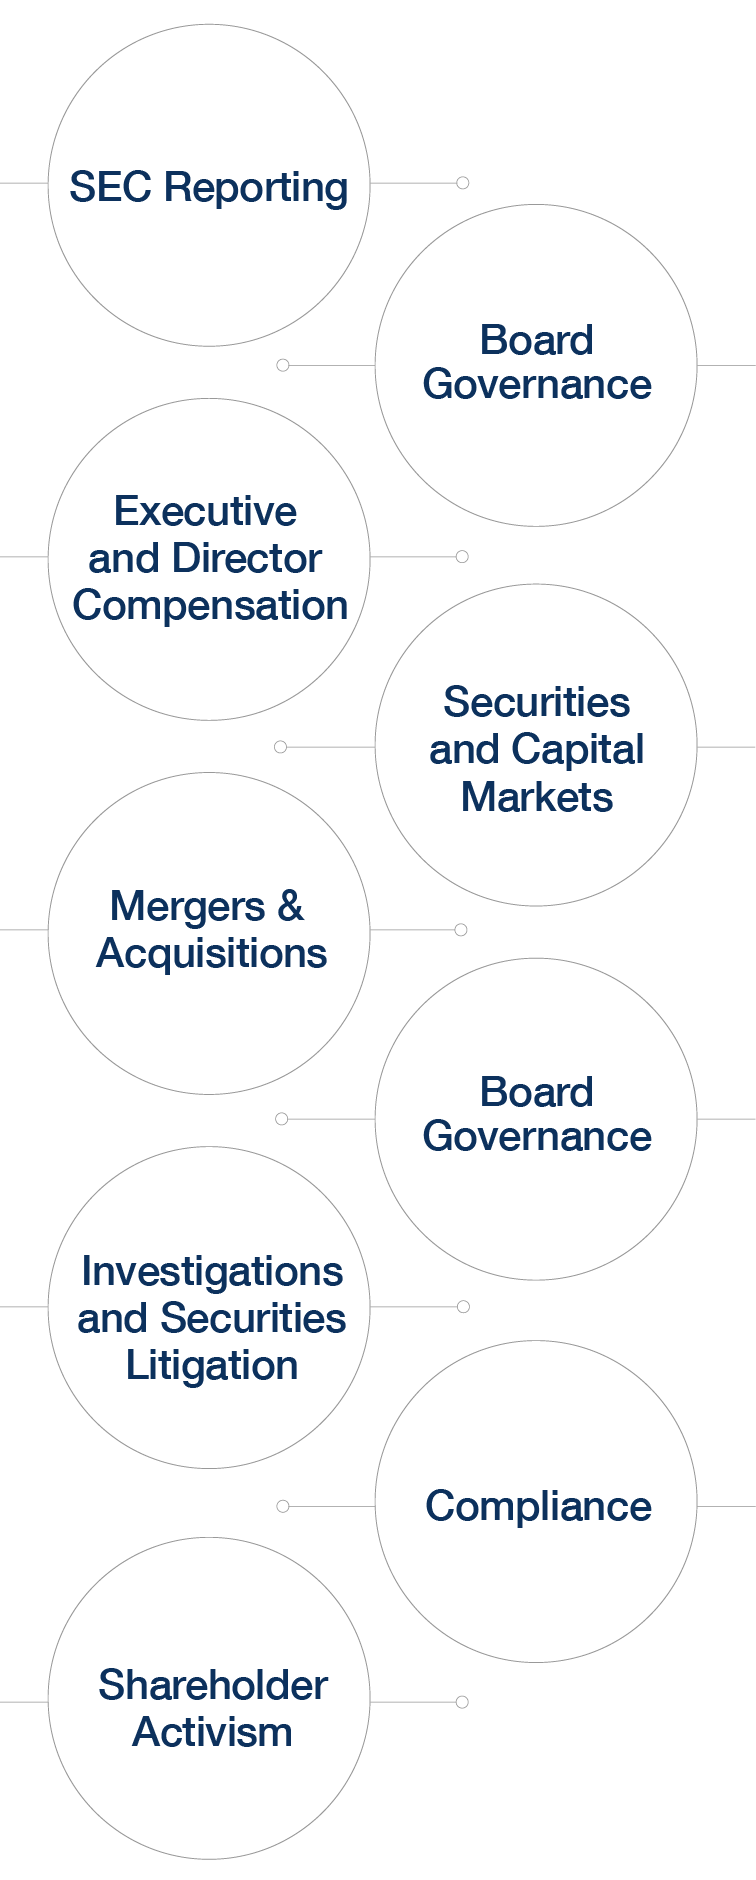 SEC Reporting, Board Governance, Executive and Director Compensation, Securities and Capital Markets, Mergers & Acquisitions, Board Governance, Investigations and Securities Litigation, Compliance, Shareholder Activism